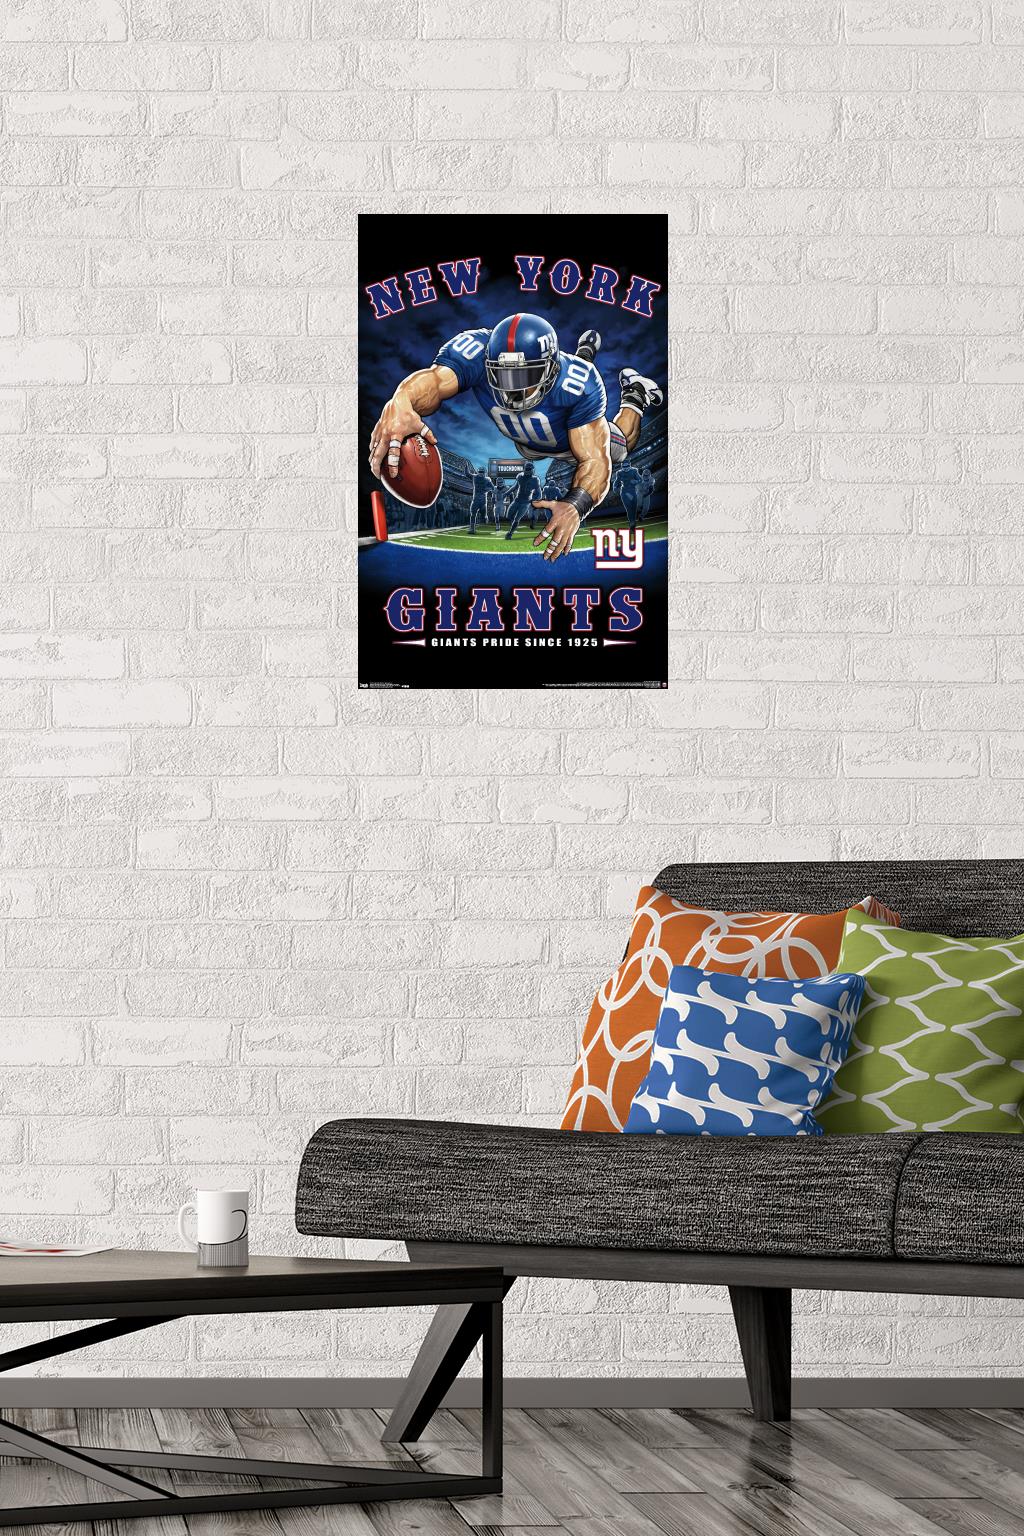 NFL New York Giants - End Zone 17 Wall Poster, 14.725" x 22.375" - image 2 of 5